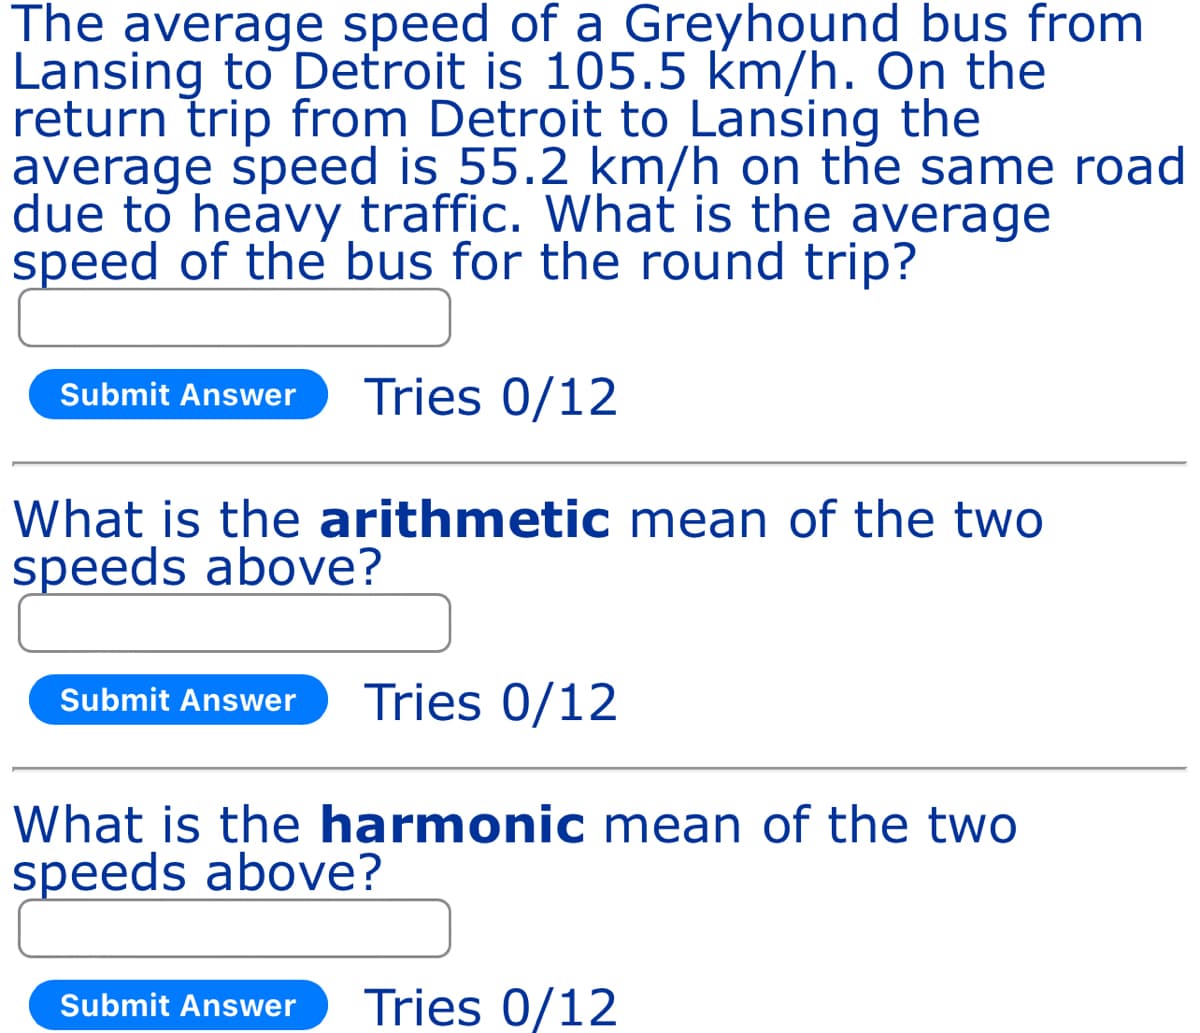 The average speed of a Greyhound bus from
Lansing to Detroit is 105.5 km/h. On the
return trip from Detroit to Lansing the
average speed is 55.2 km/h on the same road
due to heavy traffic. What is the average
speed of the bus for the round trip?
Submit Answer Tries 0/12
What is the arithmetic mean of the two
speeds above?
Submit Answer Tries 0/12
What is the harmonic mean of the two
speeds above?
Submit Answer Tries 0/12